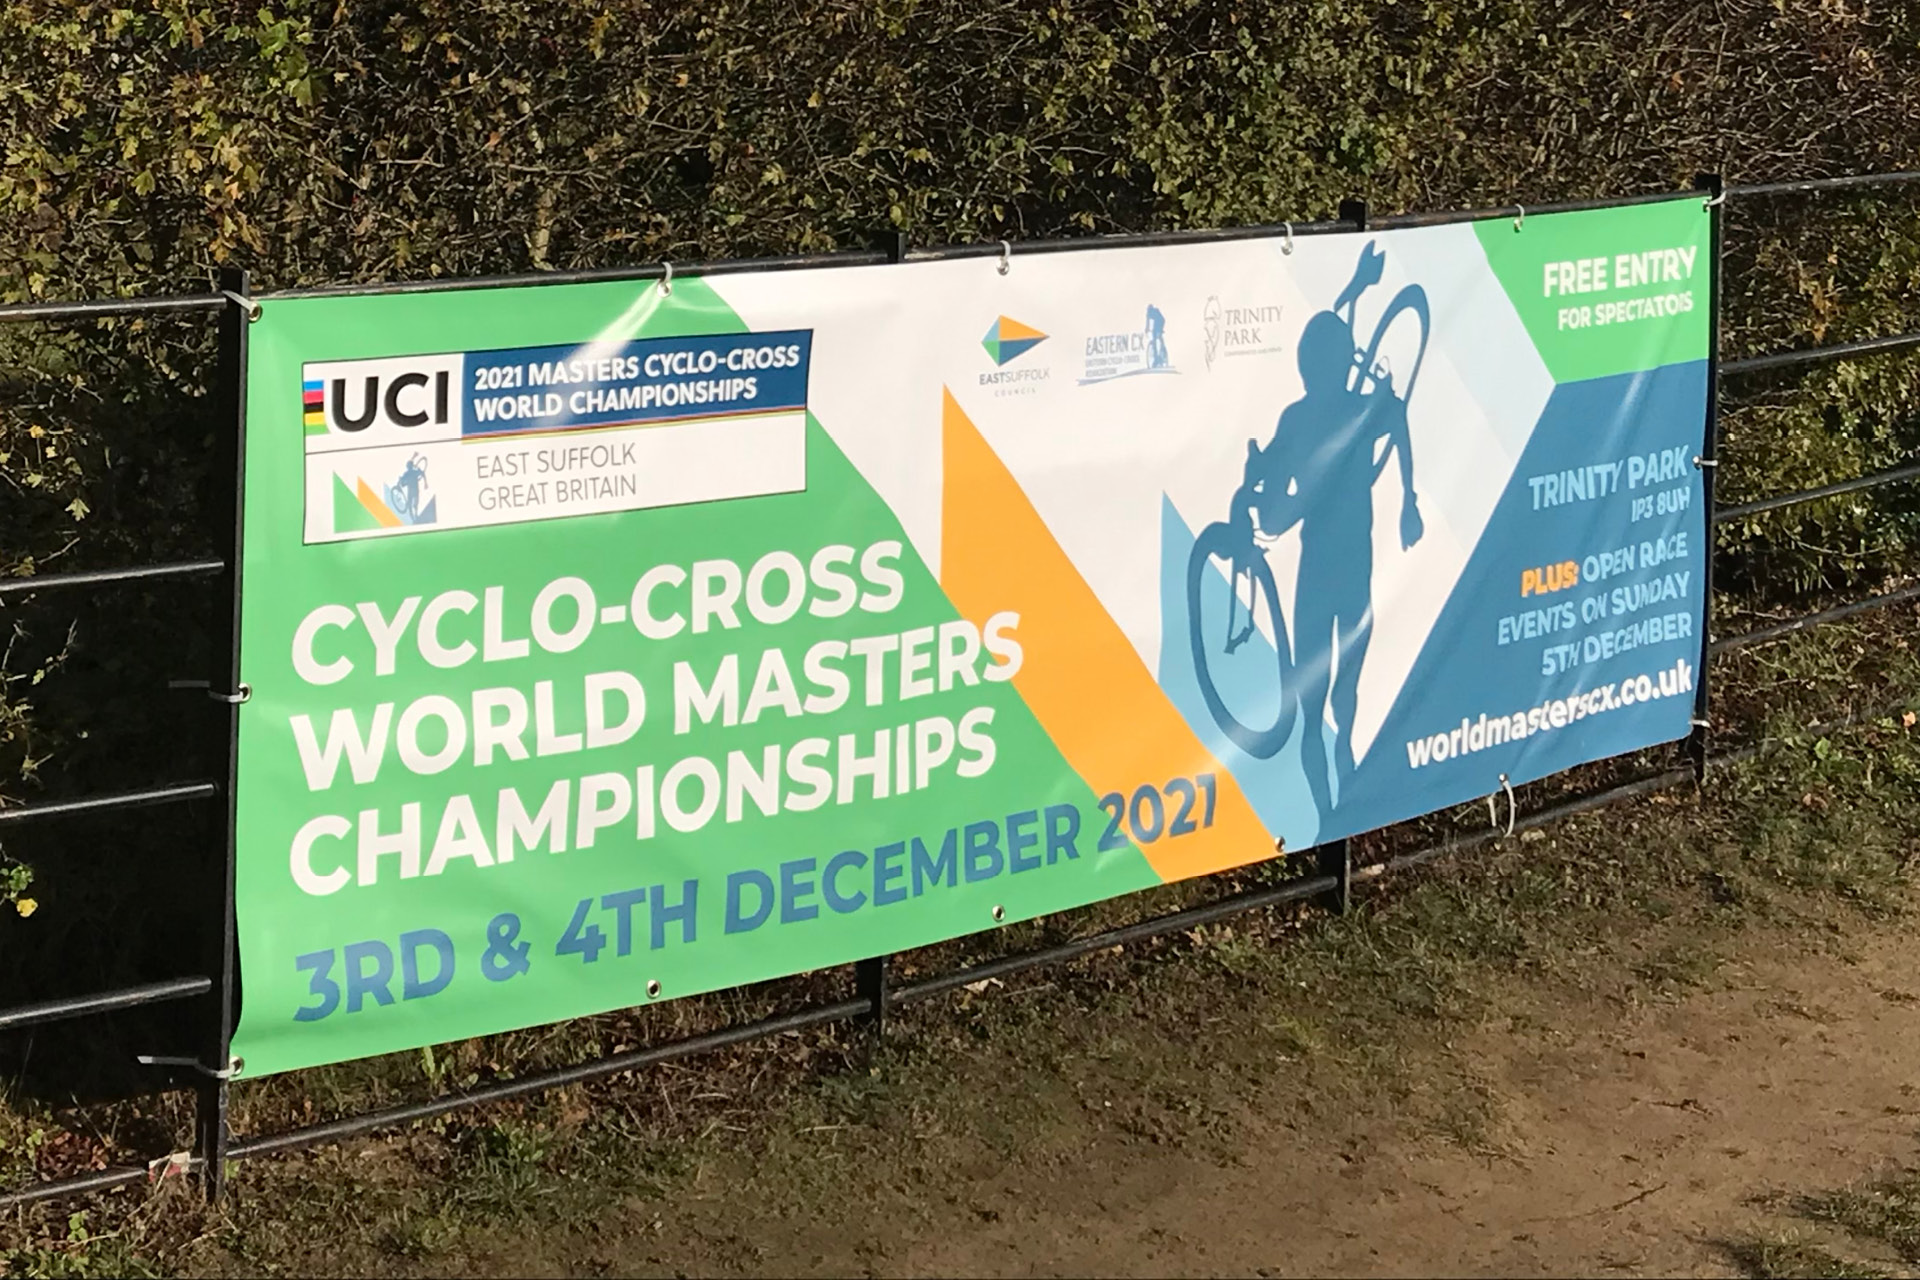 PVC event banner for cyclo-cross trinity park ipswich